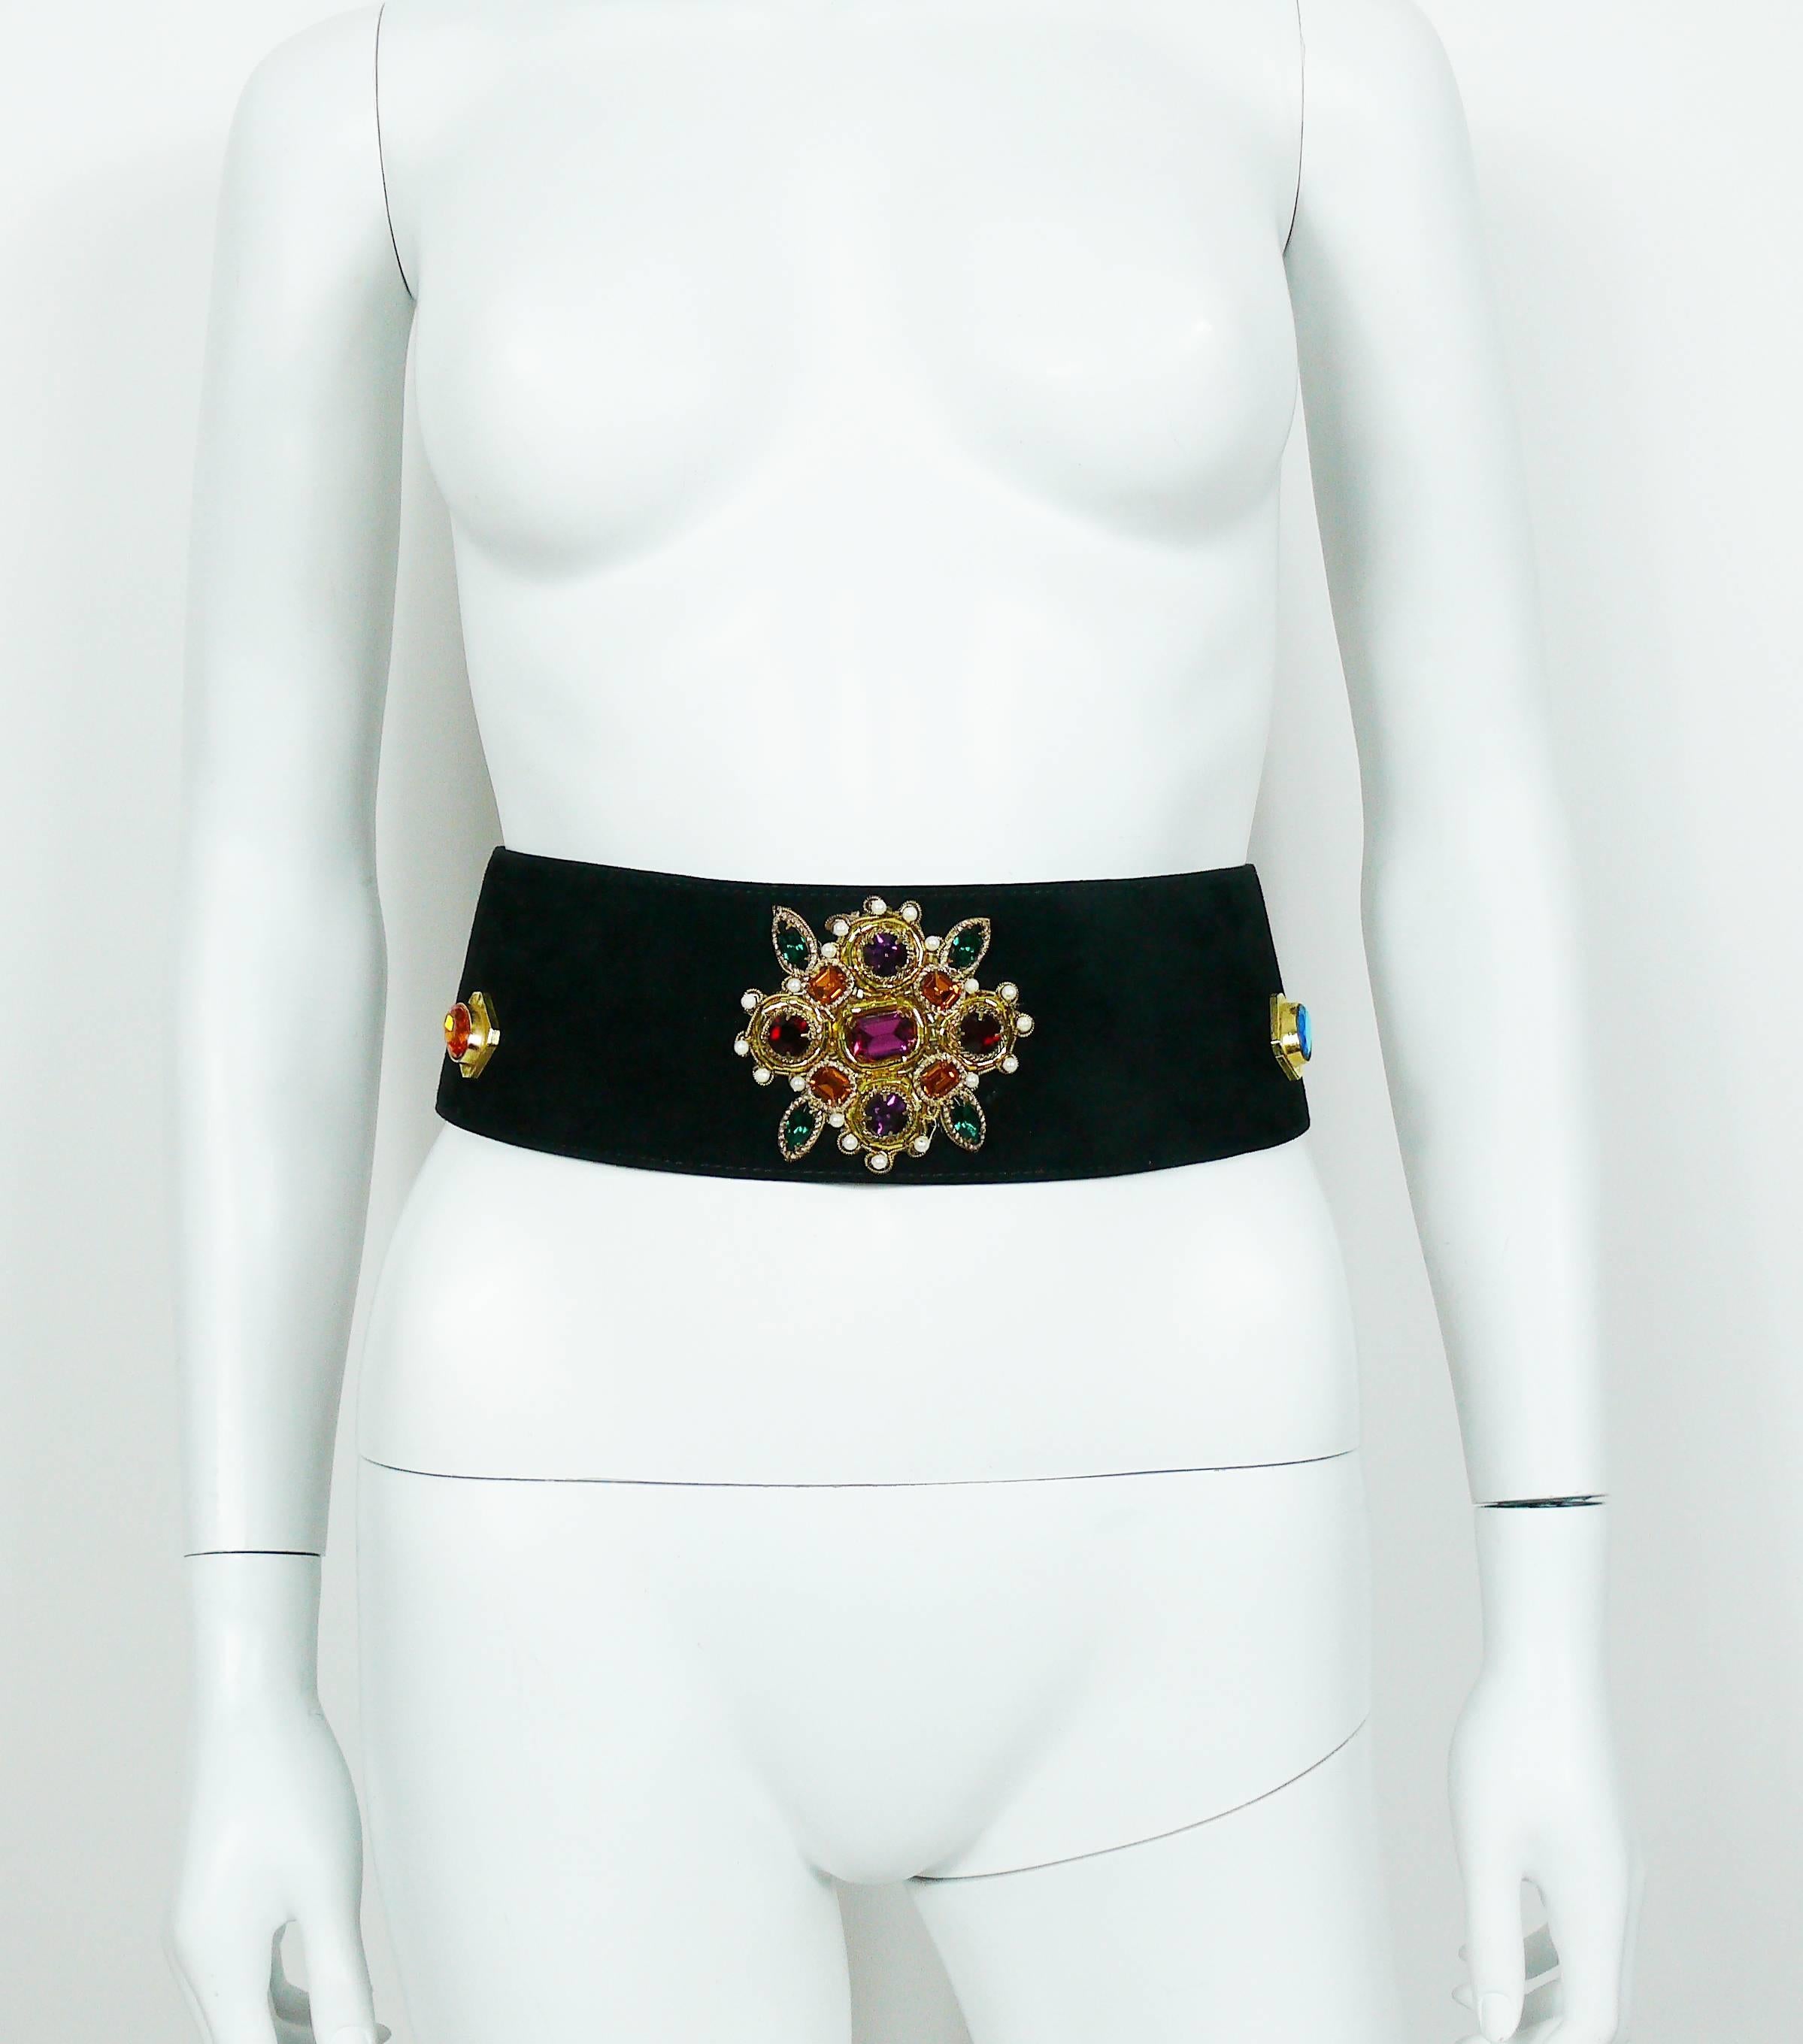 LOUIS FERAUD vintage black pigskin velvet wide waist belt featuring  multicolored crystals, resin cabochons and faux pearls in a gold toned setting.

Marked LOUIS FERAUD Paris.

No indicated size.
Please check measurements.

Indicative measurements